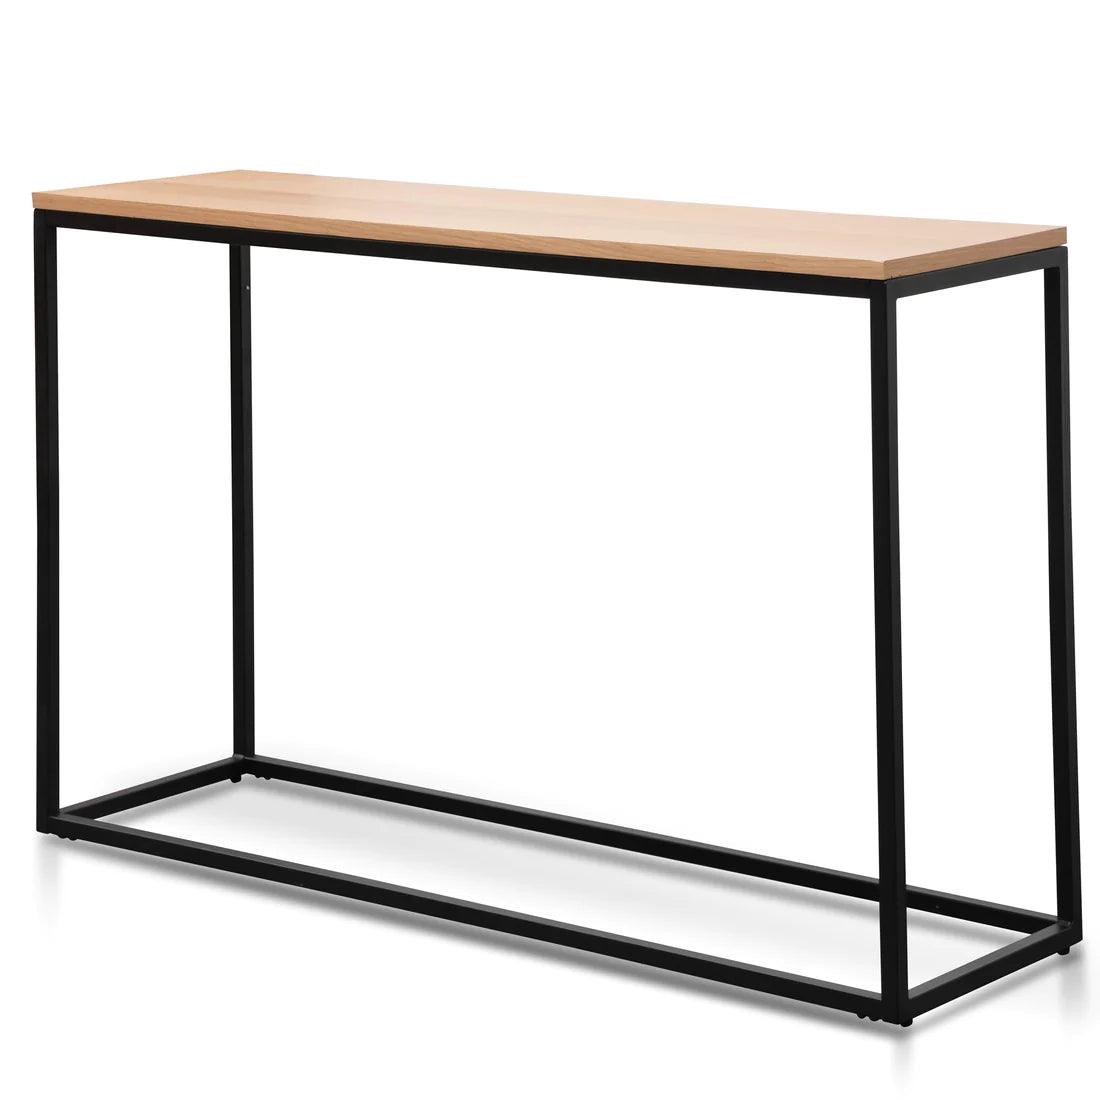 Woody 1.2m Console Table - Natural Top and Black Legs - Furniture Castle